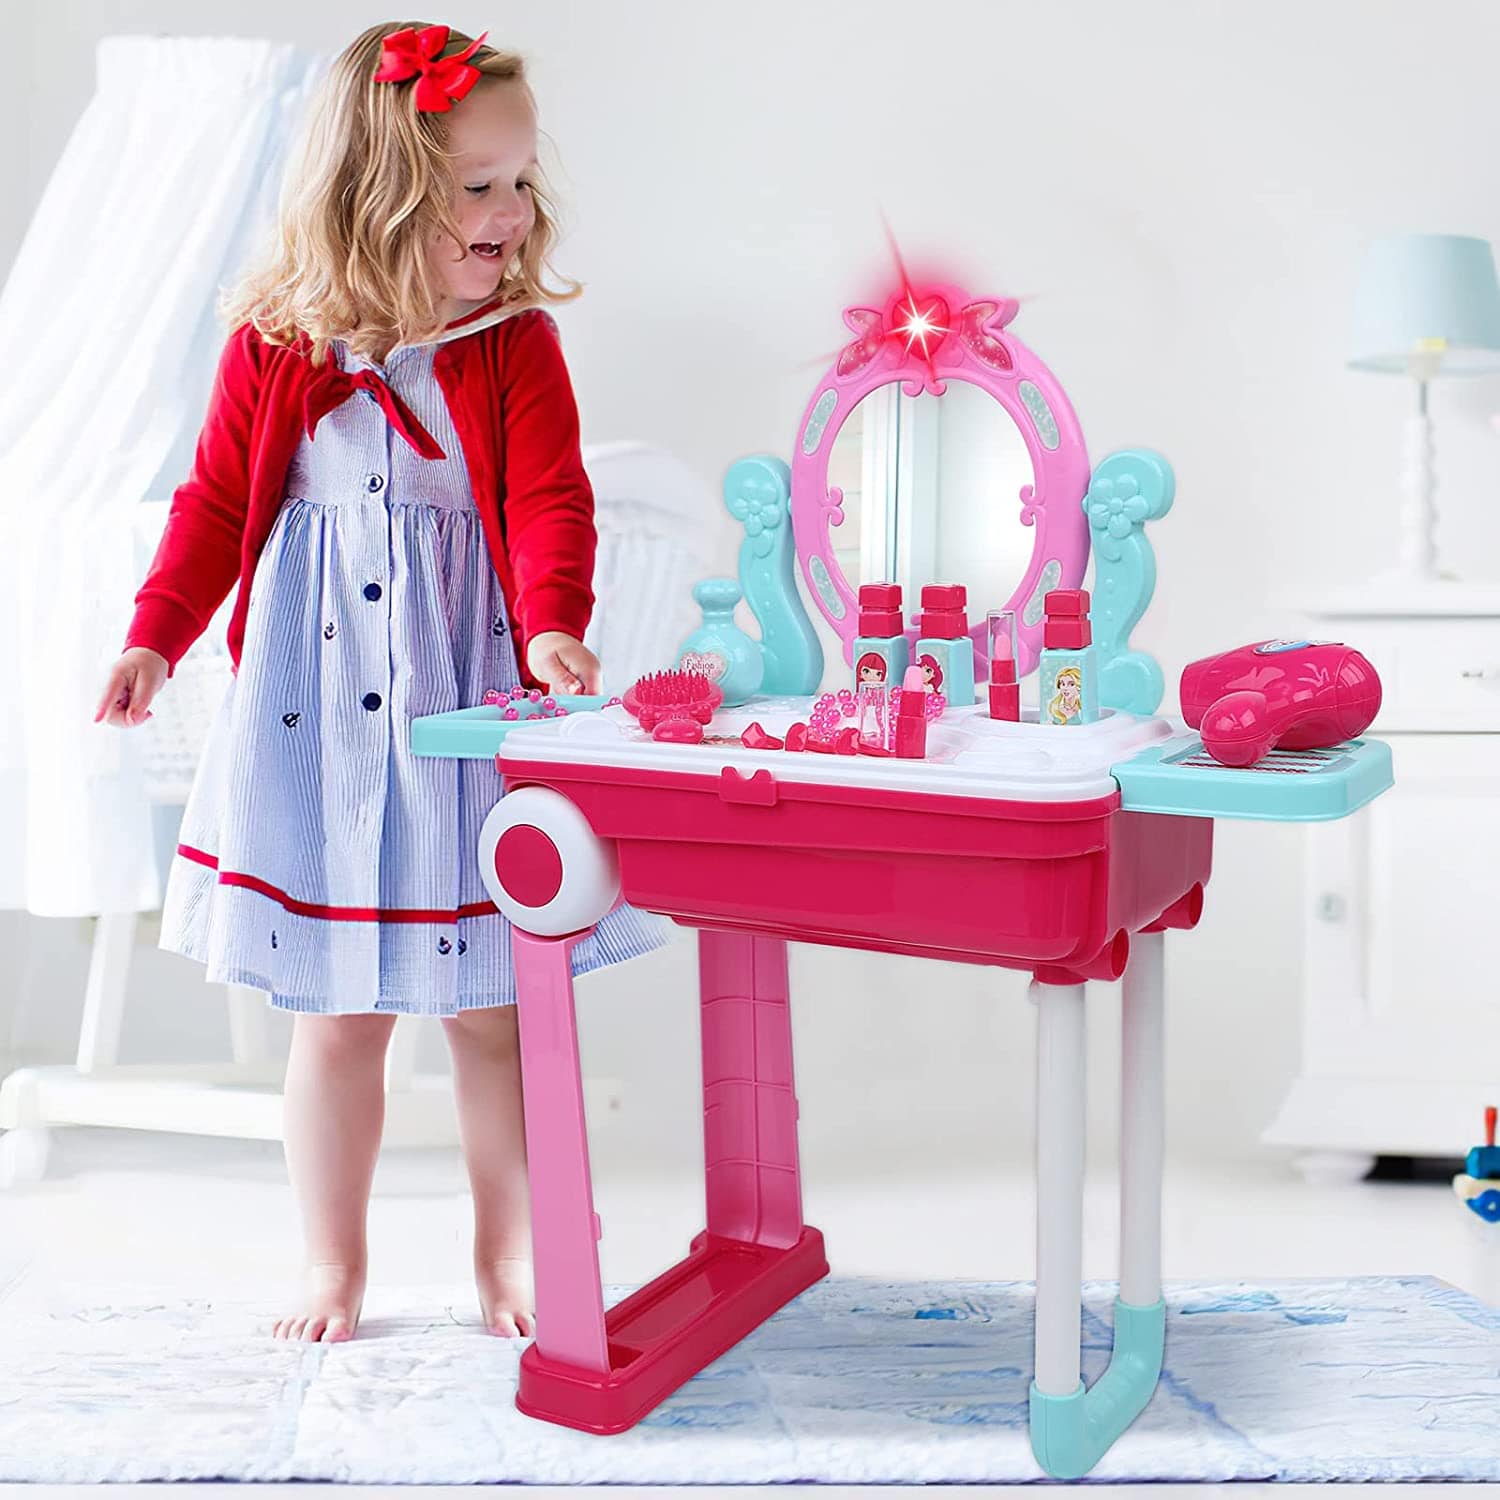 2 IN 1 Beauty Set Suitcase Play Set